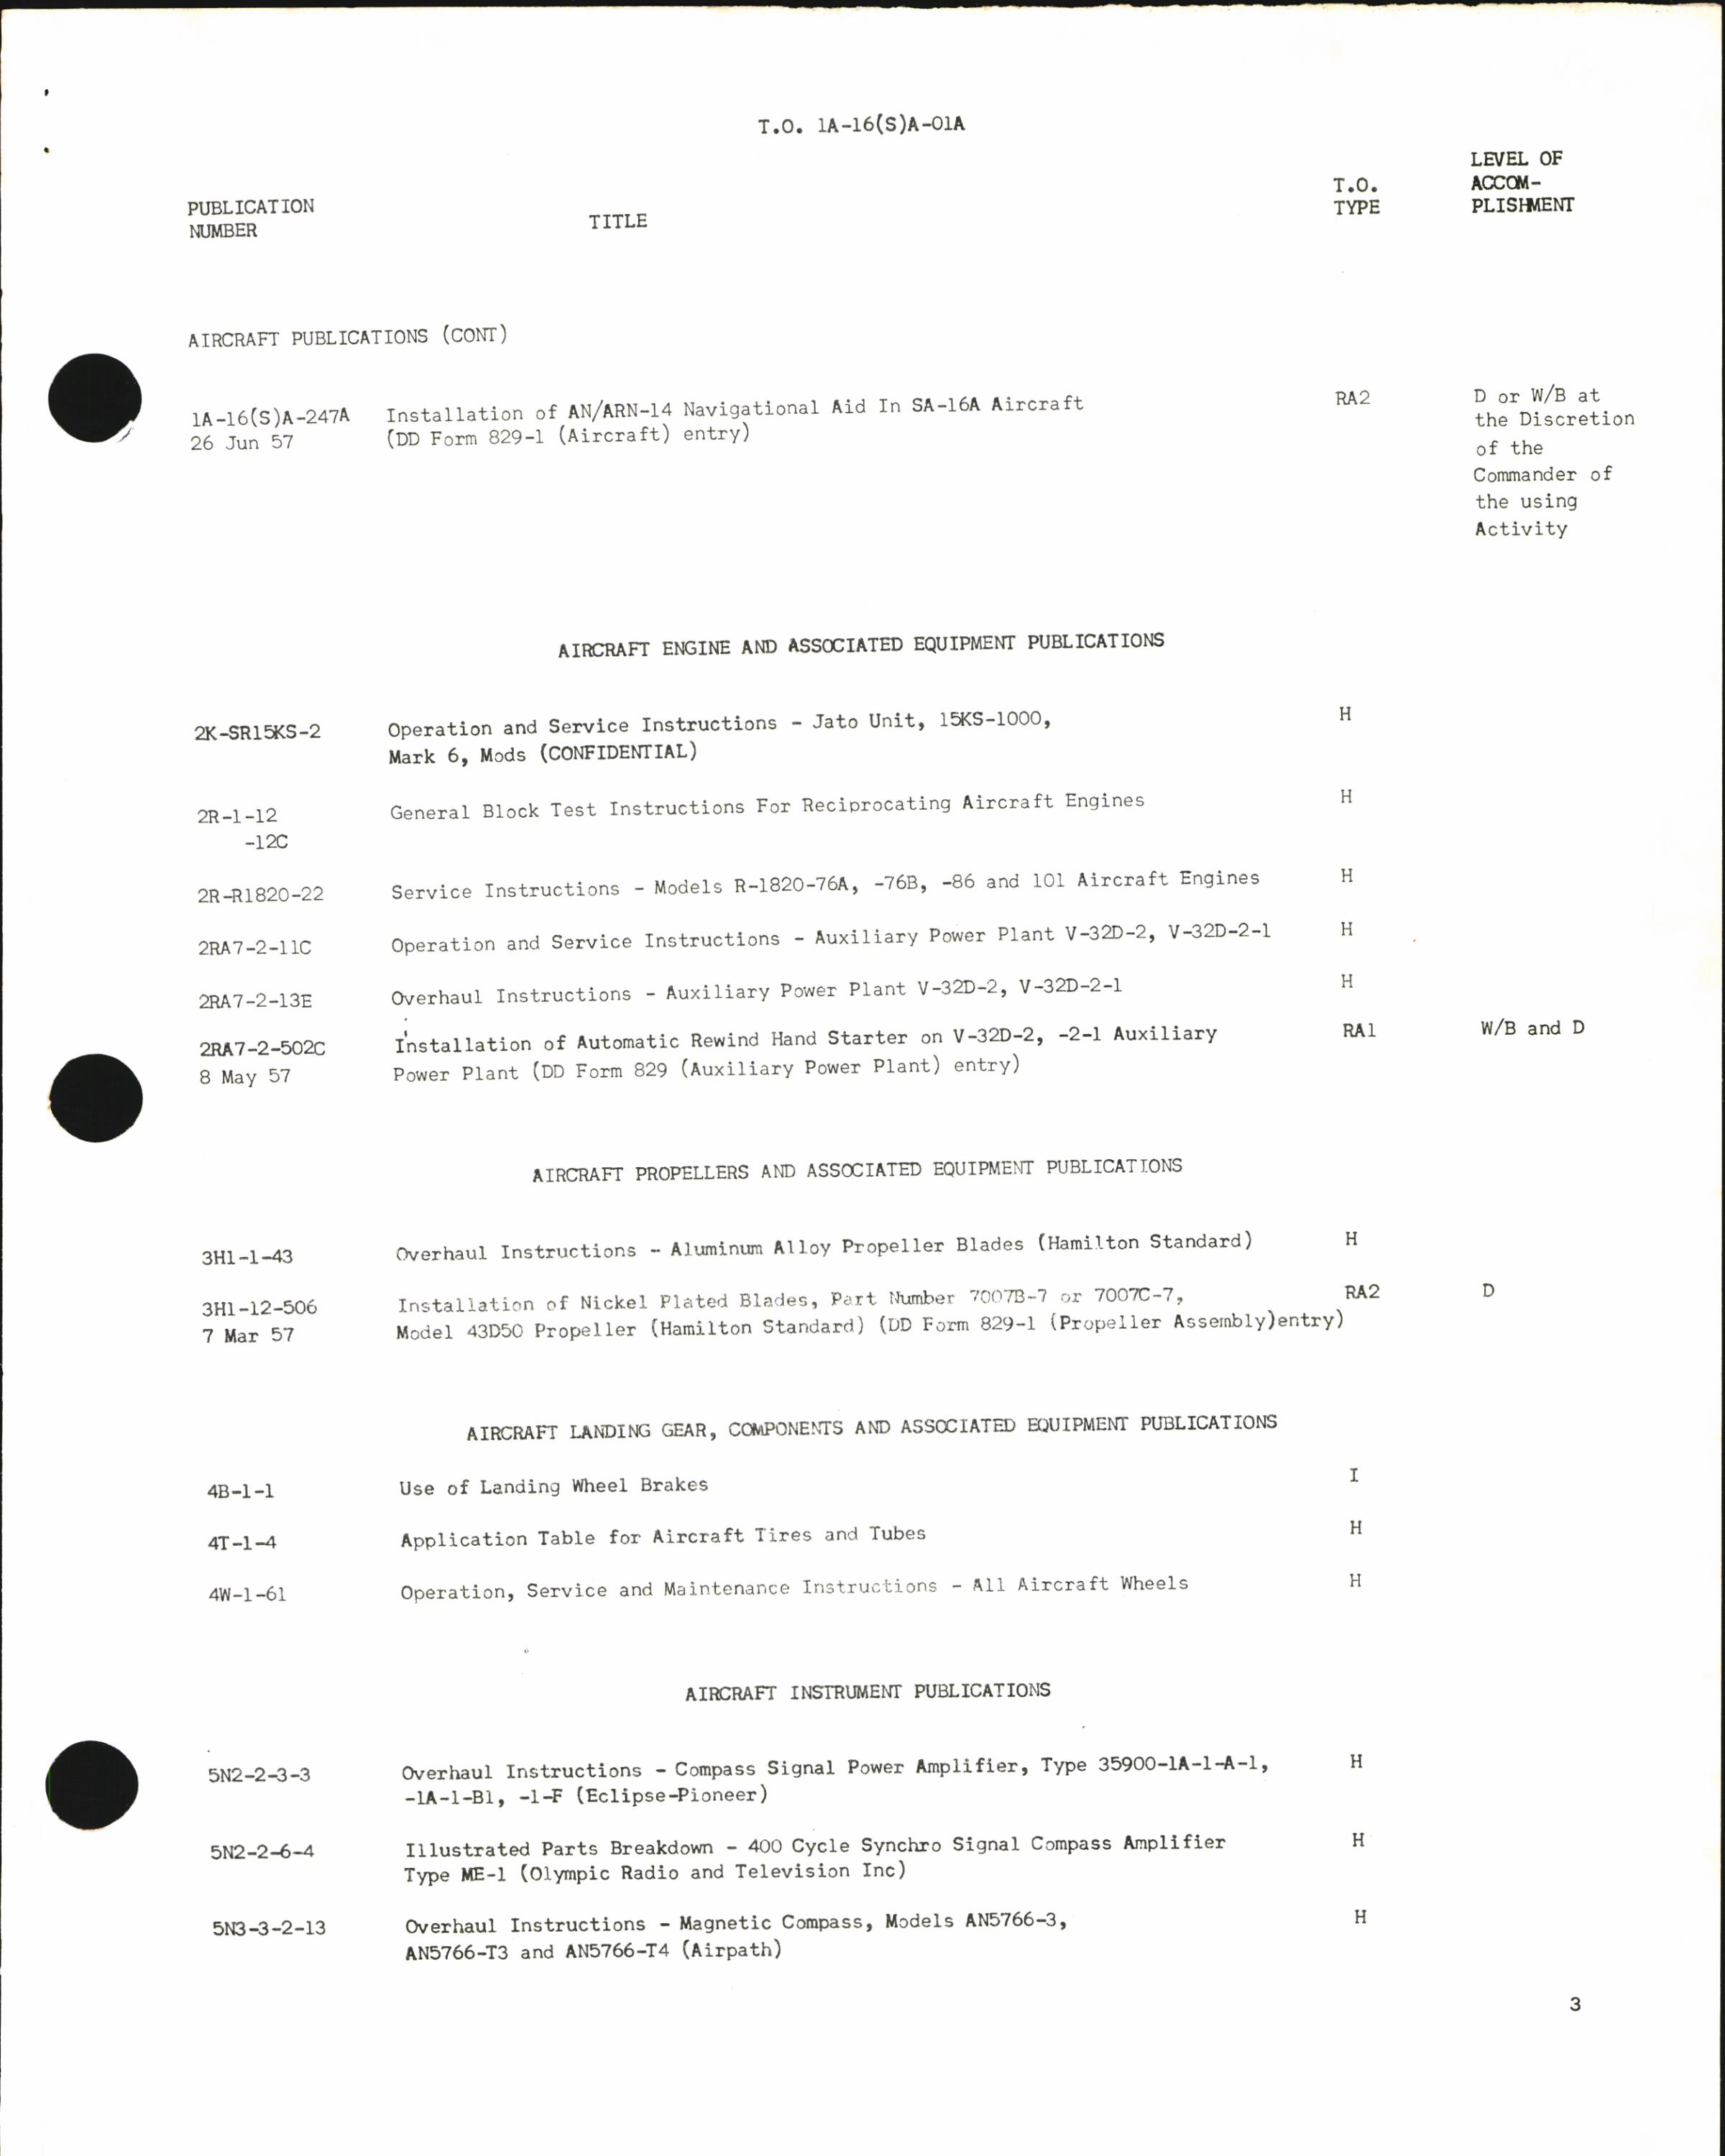 Sample page 5 from AirCorps Library document: Cumulative Supplement List of Applicable Publications for SA-16A and SA-16B Aircraft and Equipment